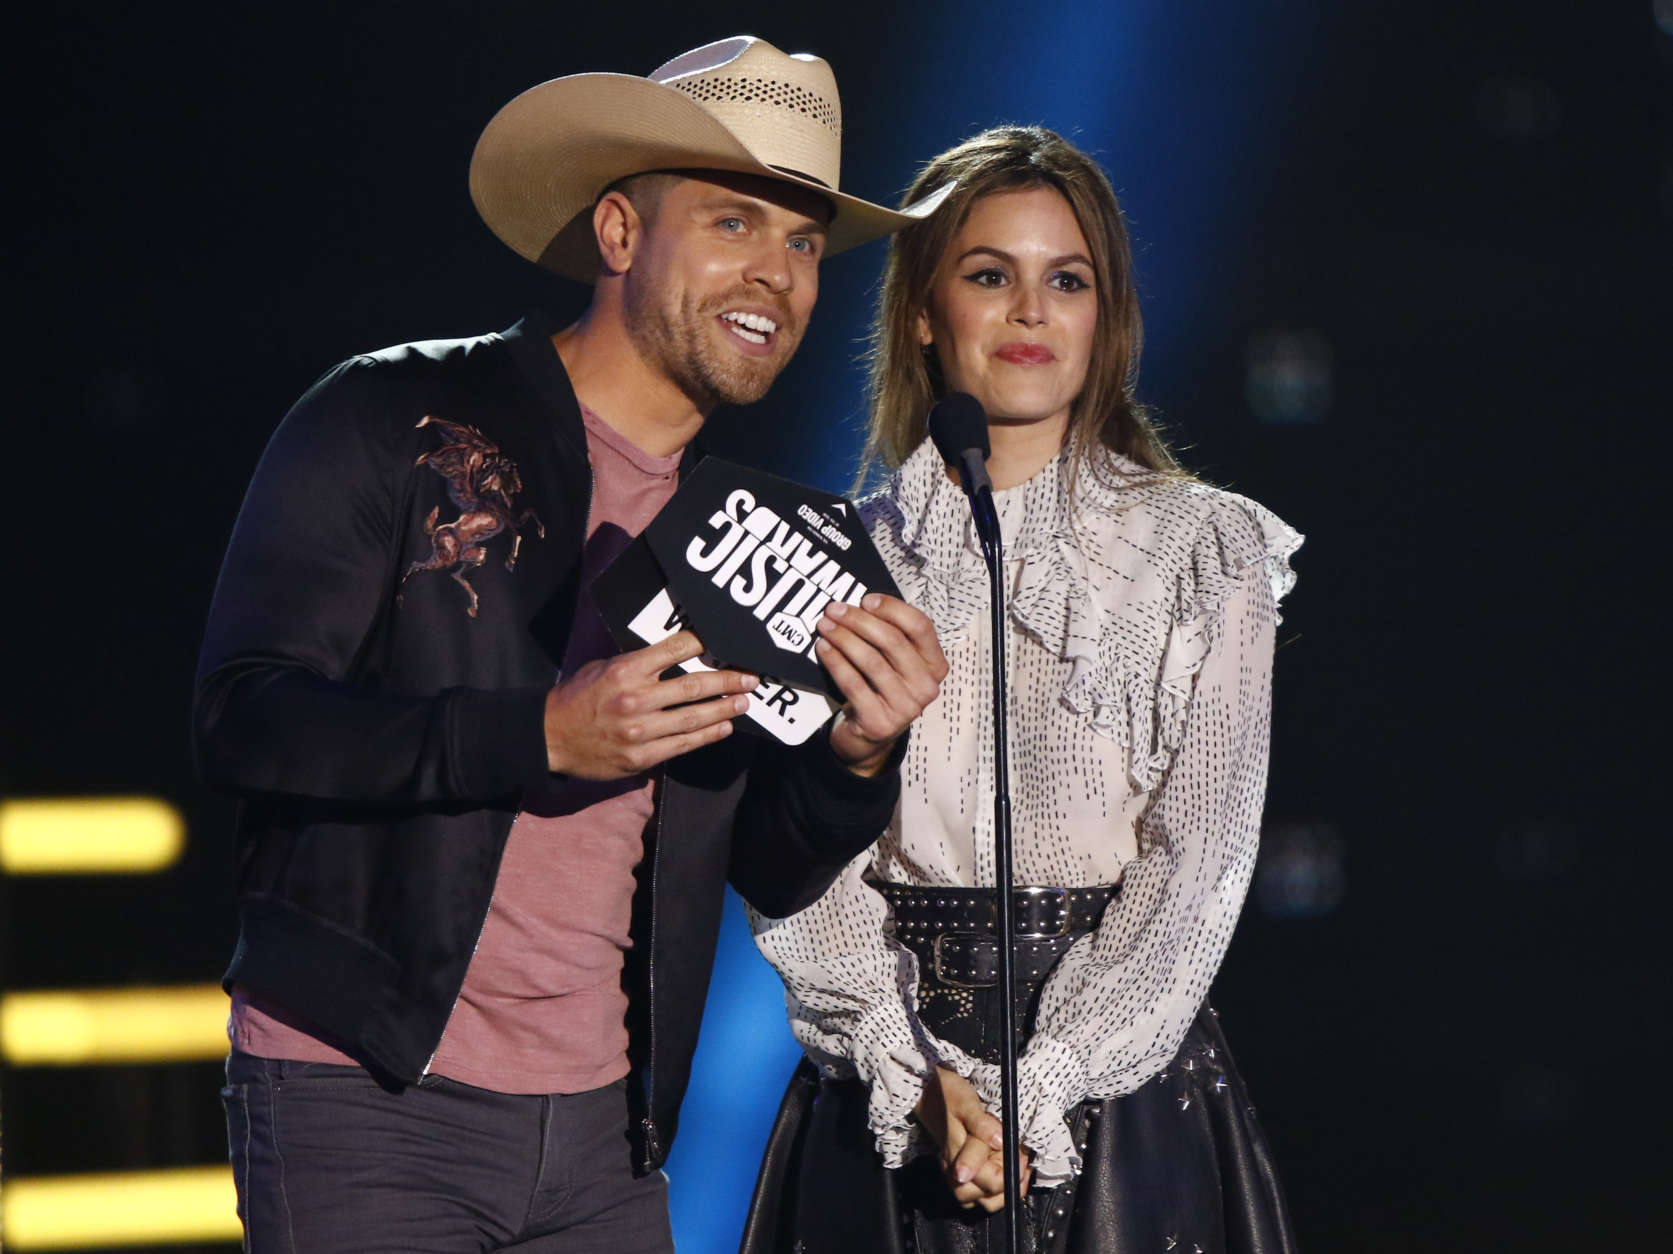 How Can I Watch Country Music Awards 2017